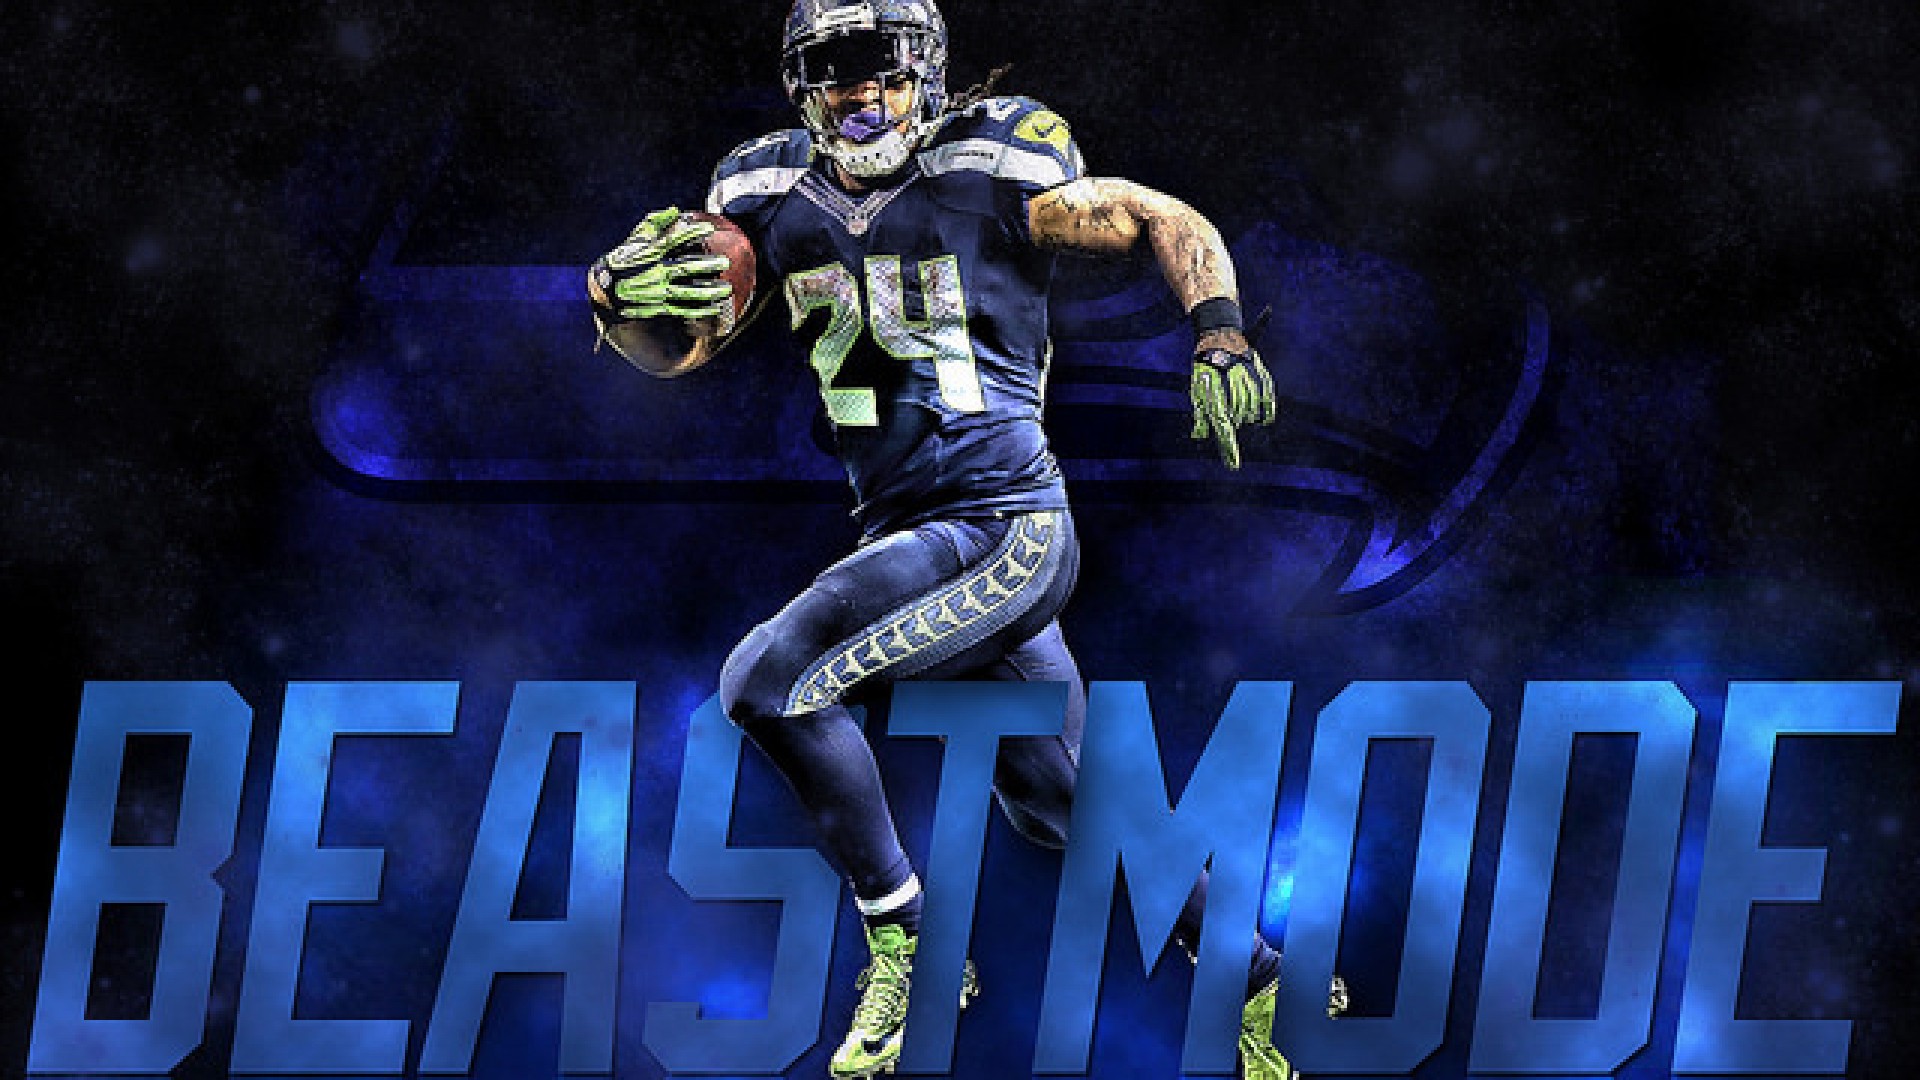 seahawks wallpaper,pc game,games,super bowl,football player,player